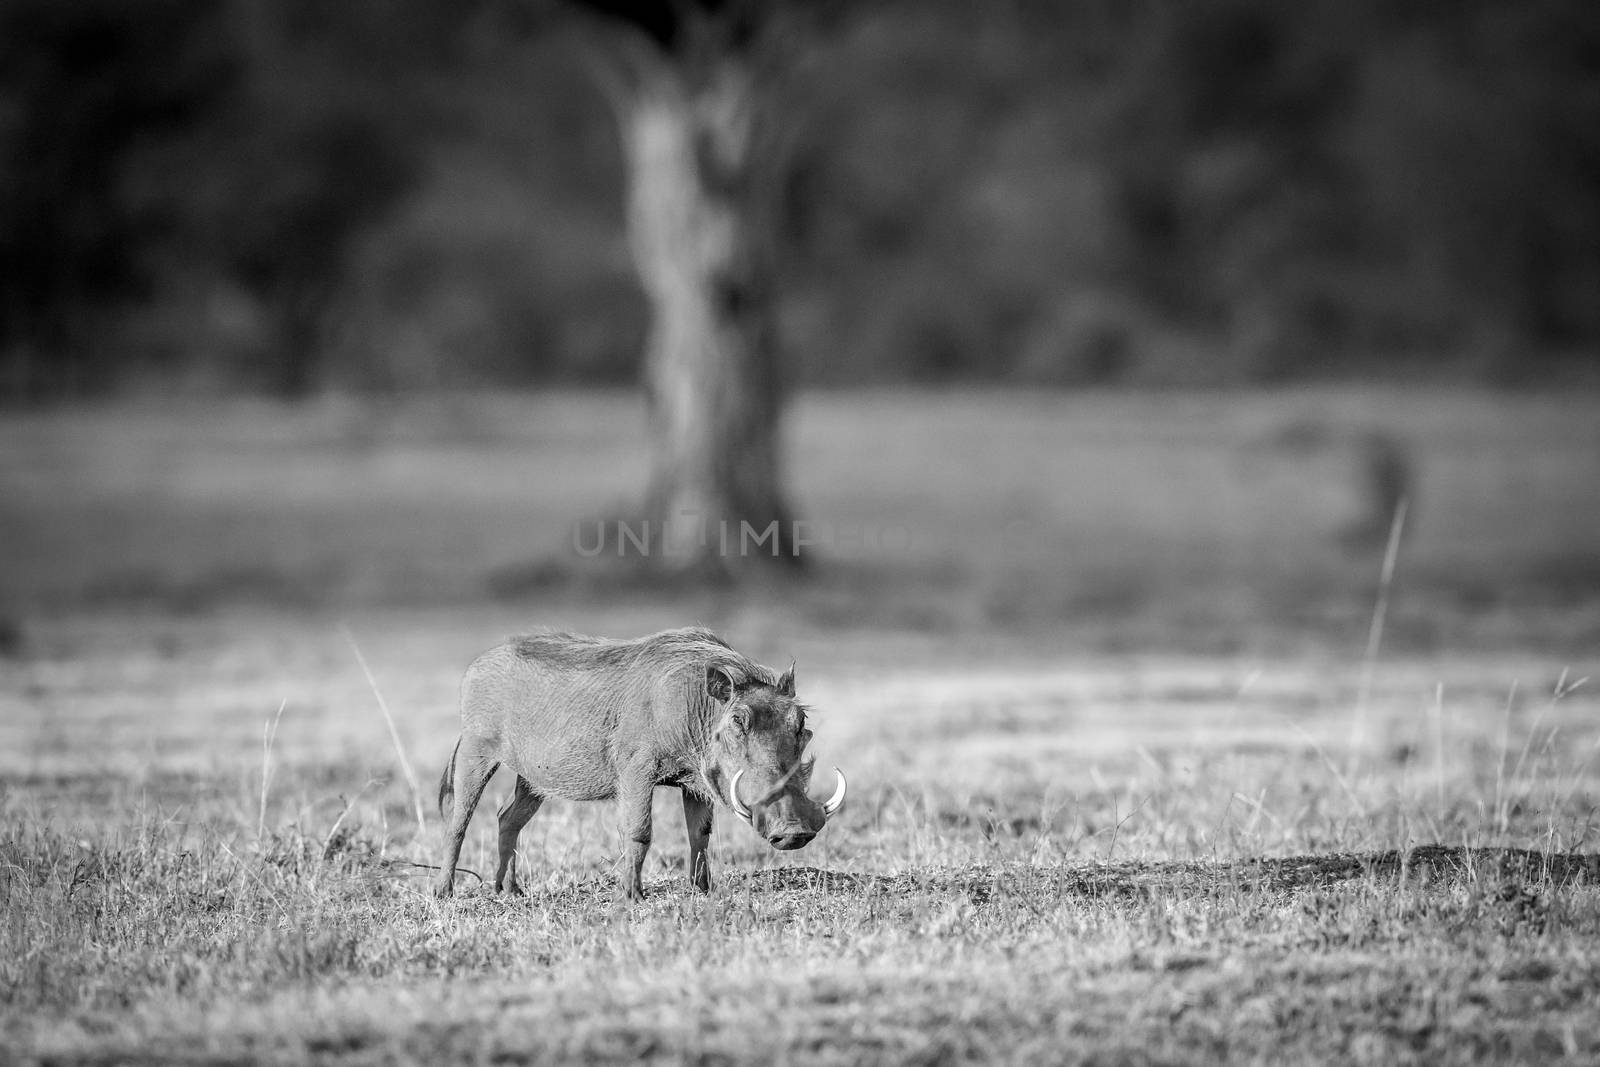 Warthog standing in the grass in black and white in the Welgevonden game reserve, South Africa.